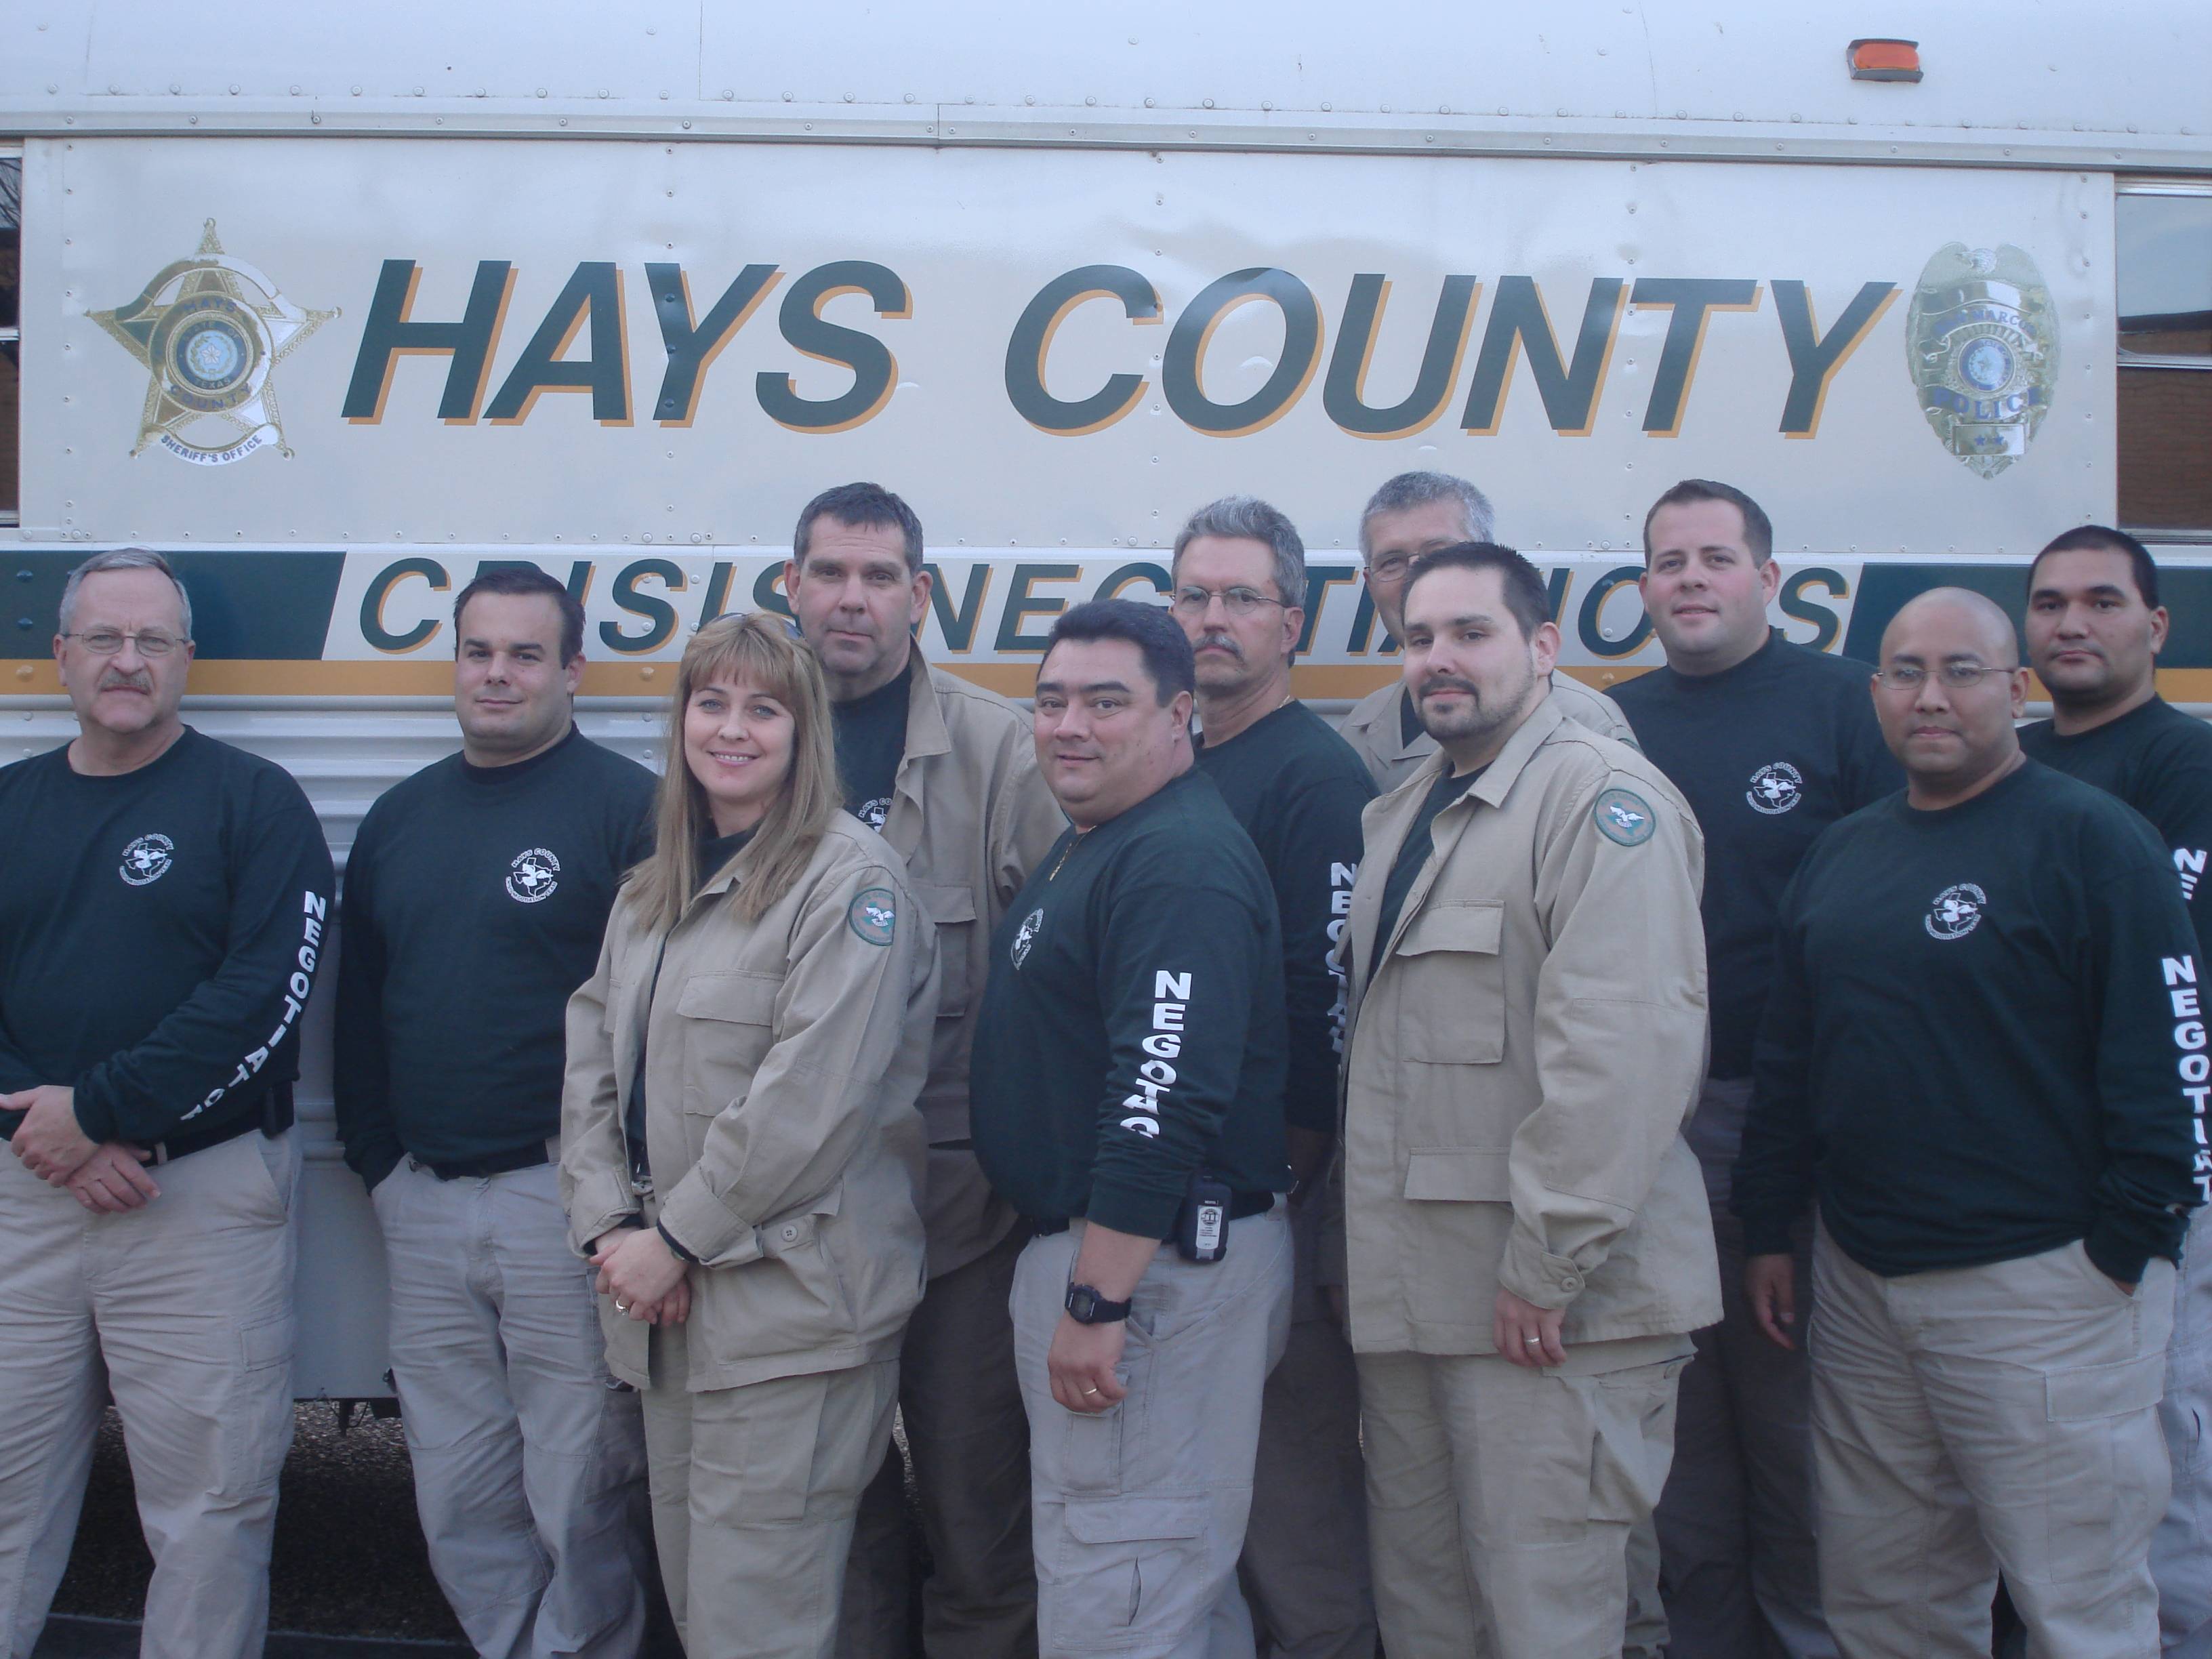 a group of event participants pose in front of a Hays Country banner